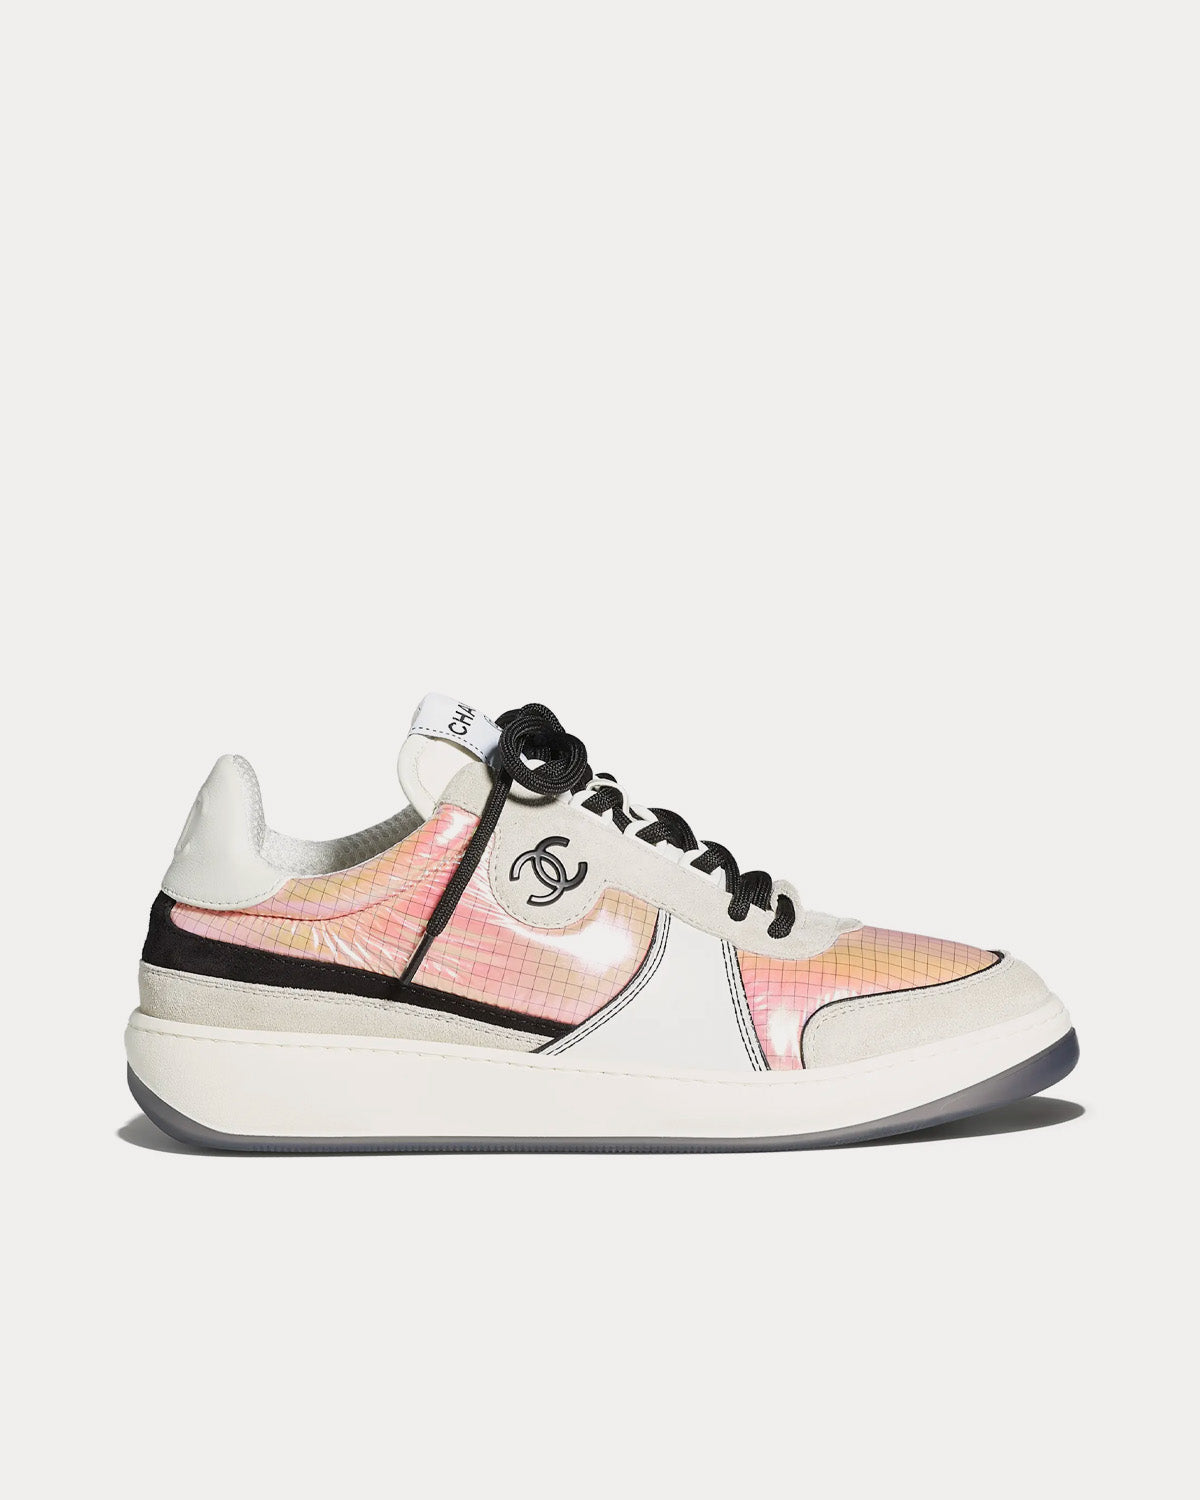 Chanel Fabric & Laminated White & Silver Low Top Sneakers - Sneak in Peace